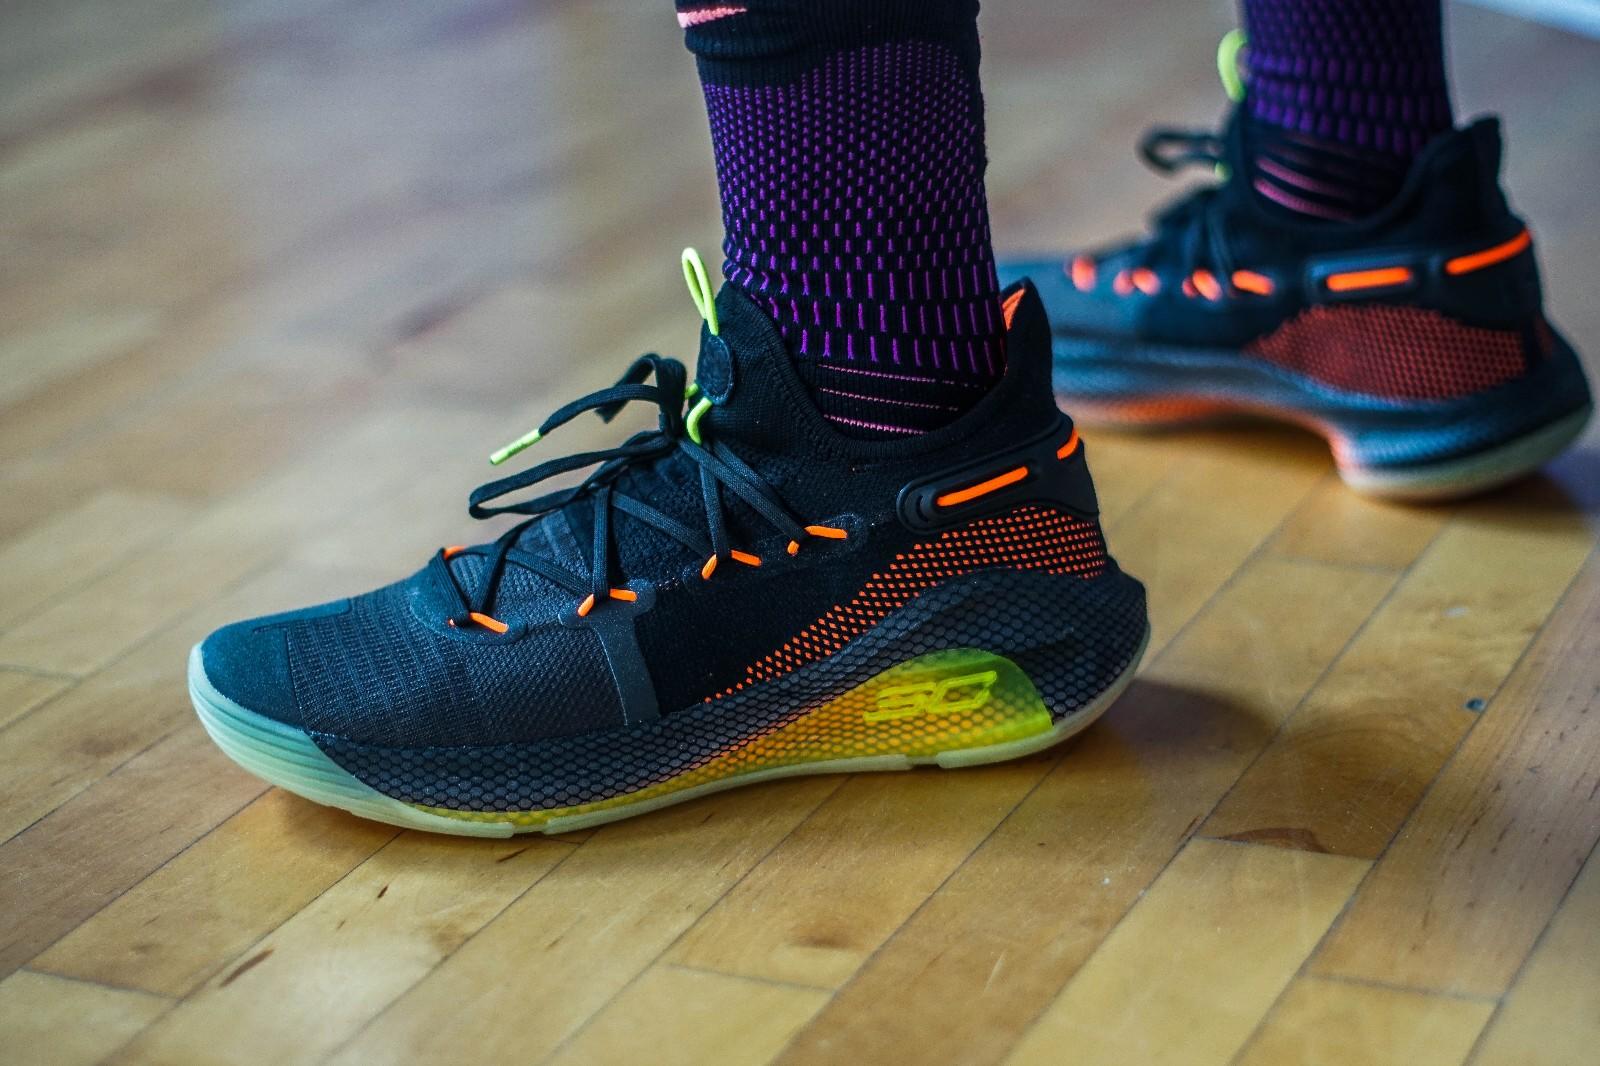 ua curry 6 performance review